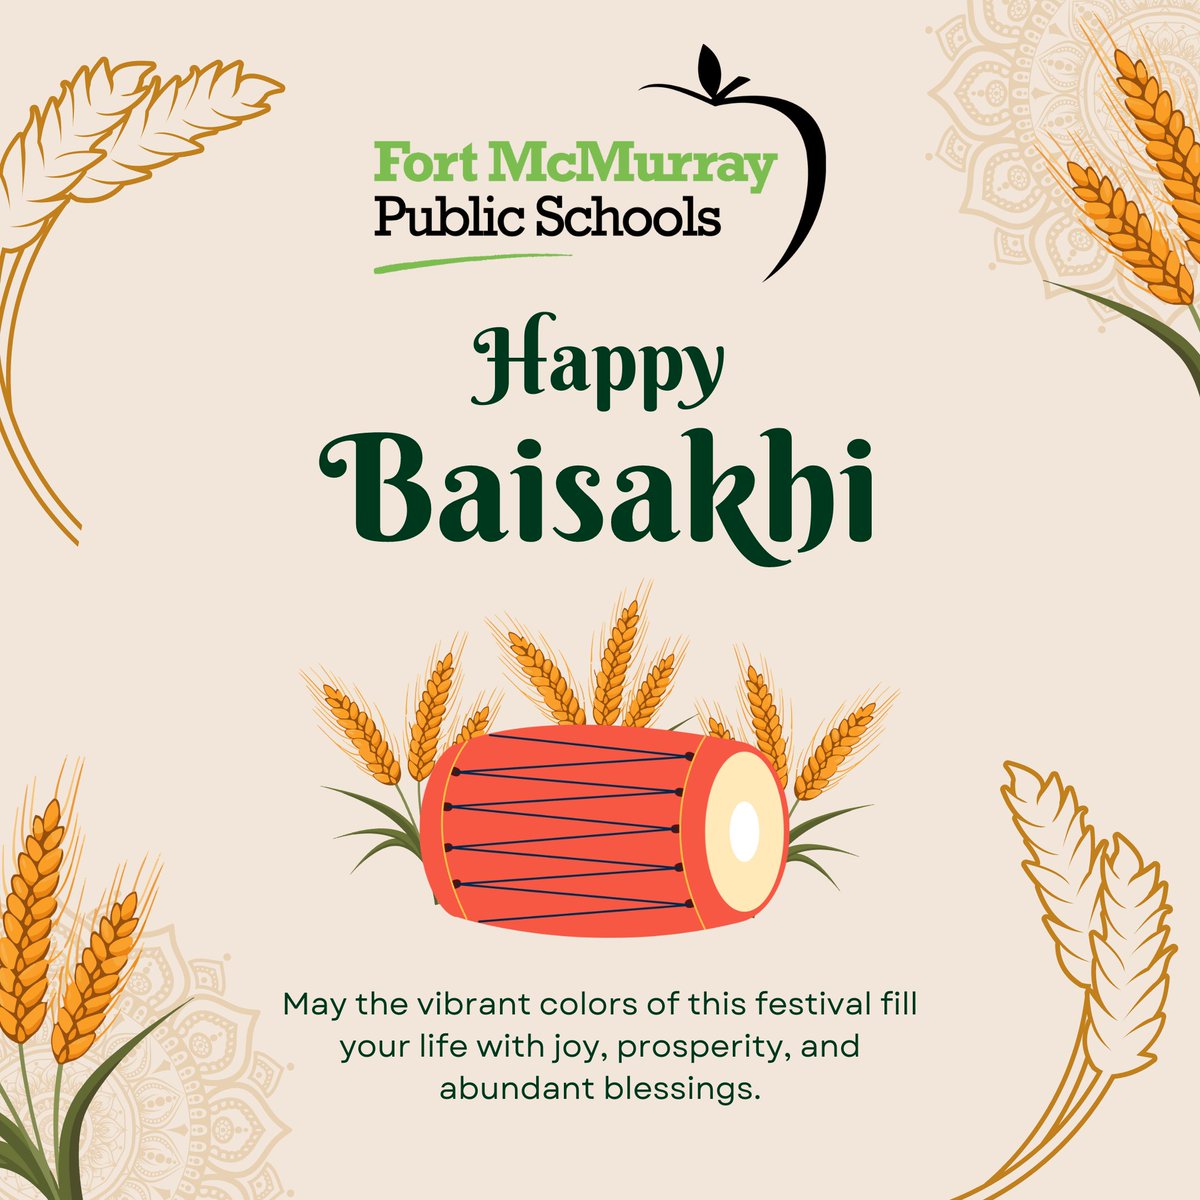 Happy Baisakhi to all celebrating! May this vibrant festival bring joy, prosperity, and an abundant harvest in your lives. @annaleeskinner #FMPSD #YMM #RMWB